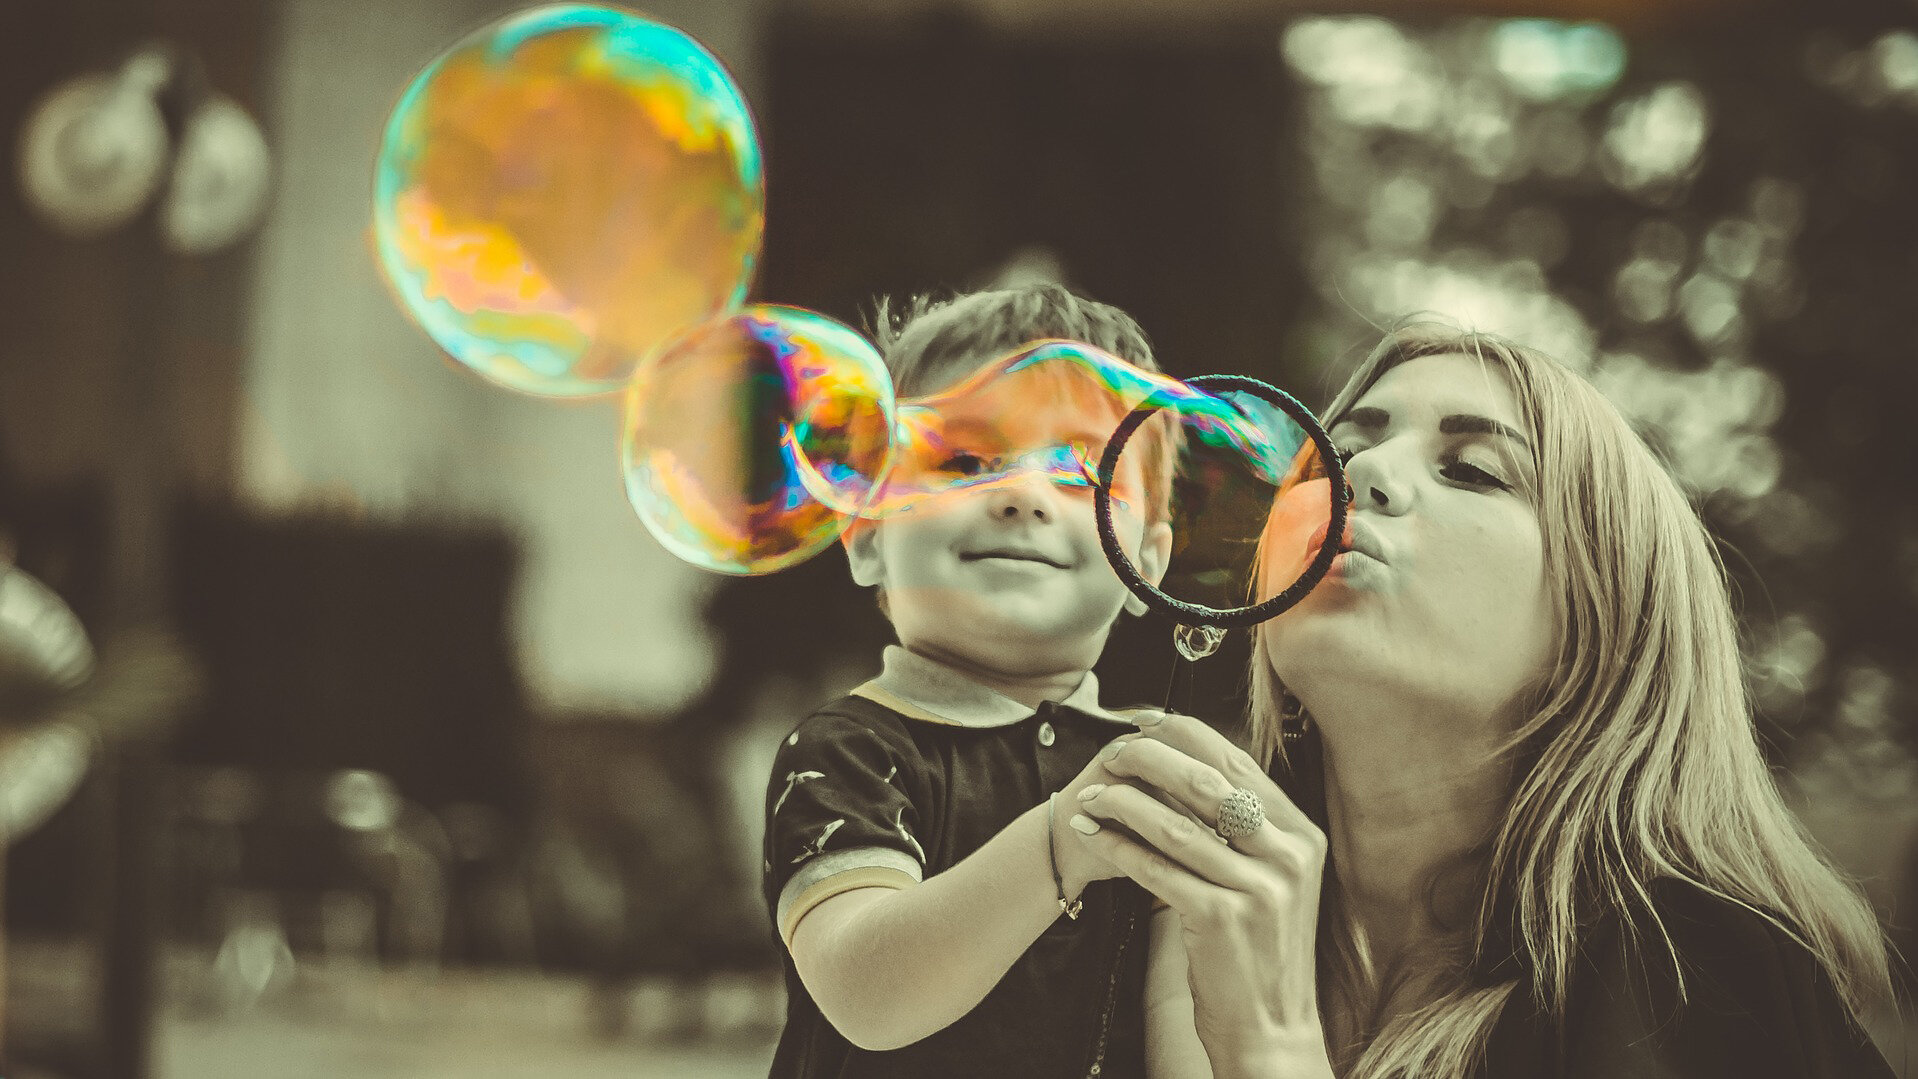 Frau mit Kind macht bunte Seifenblasen / Woman with child making colourful soap bubbles